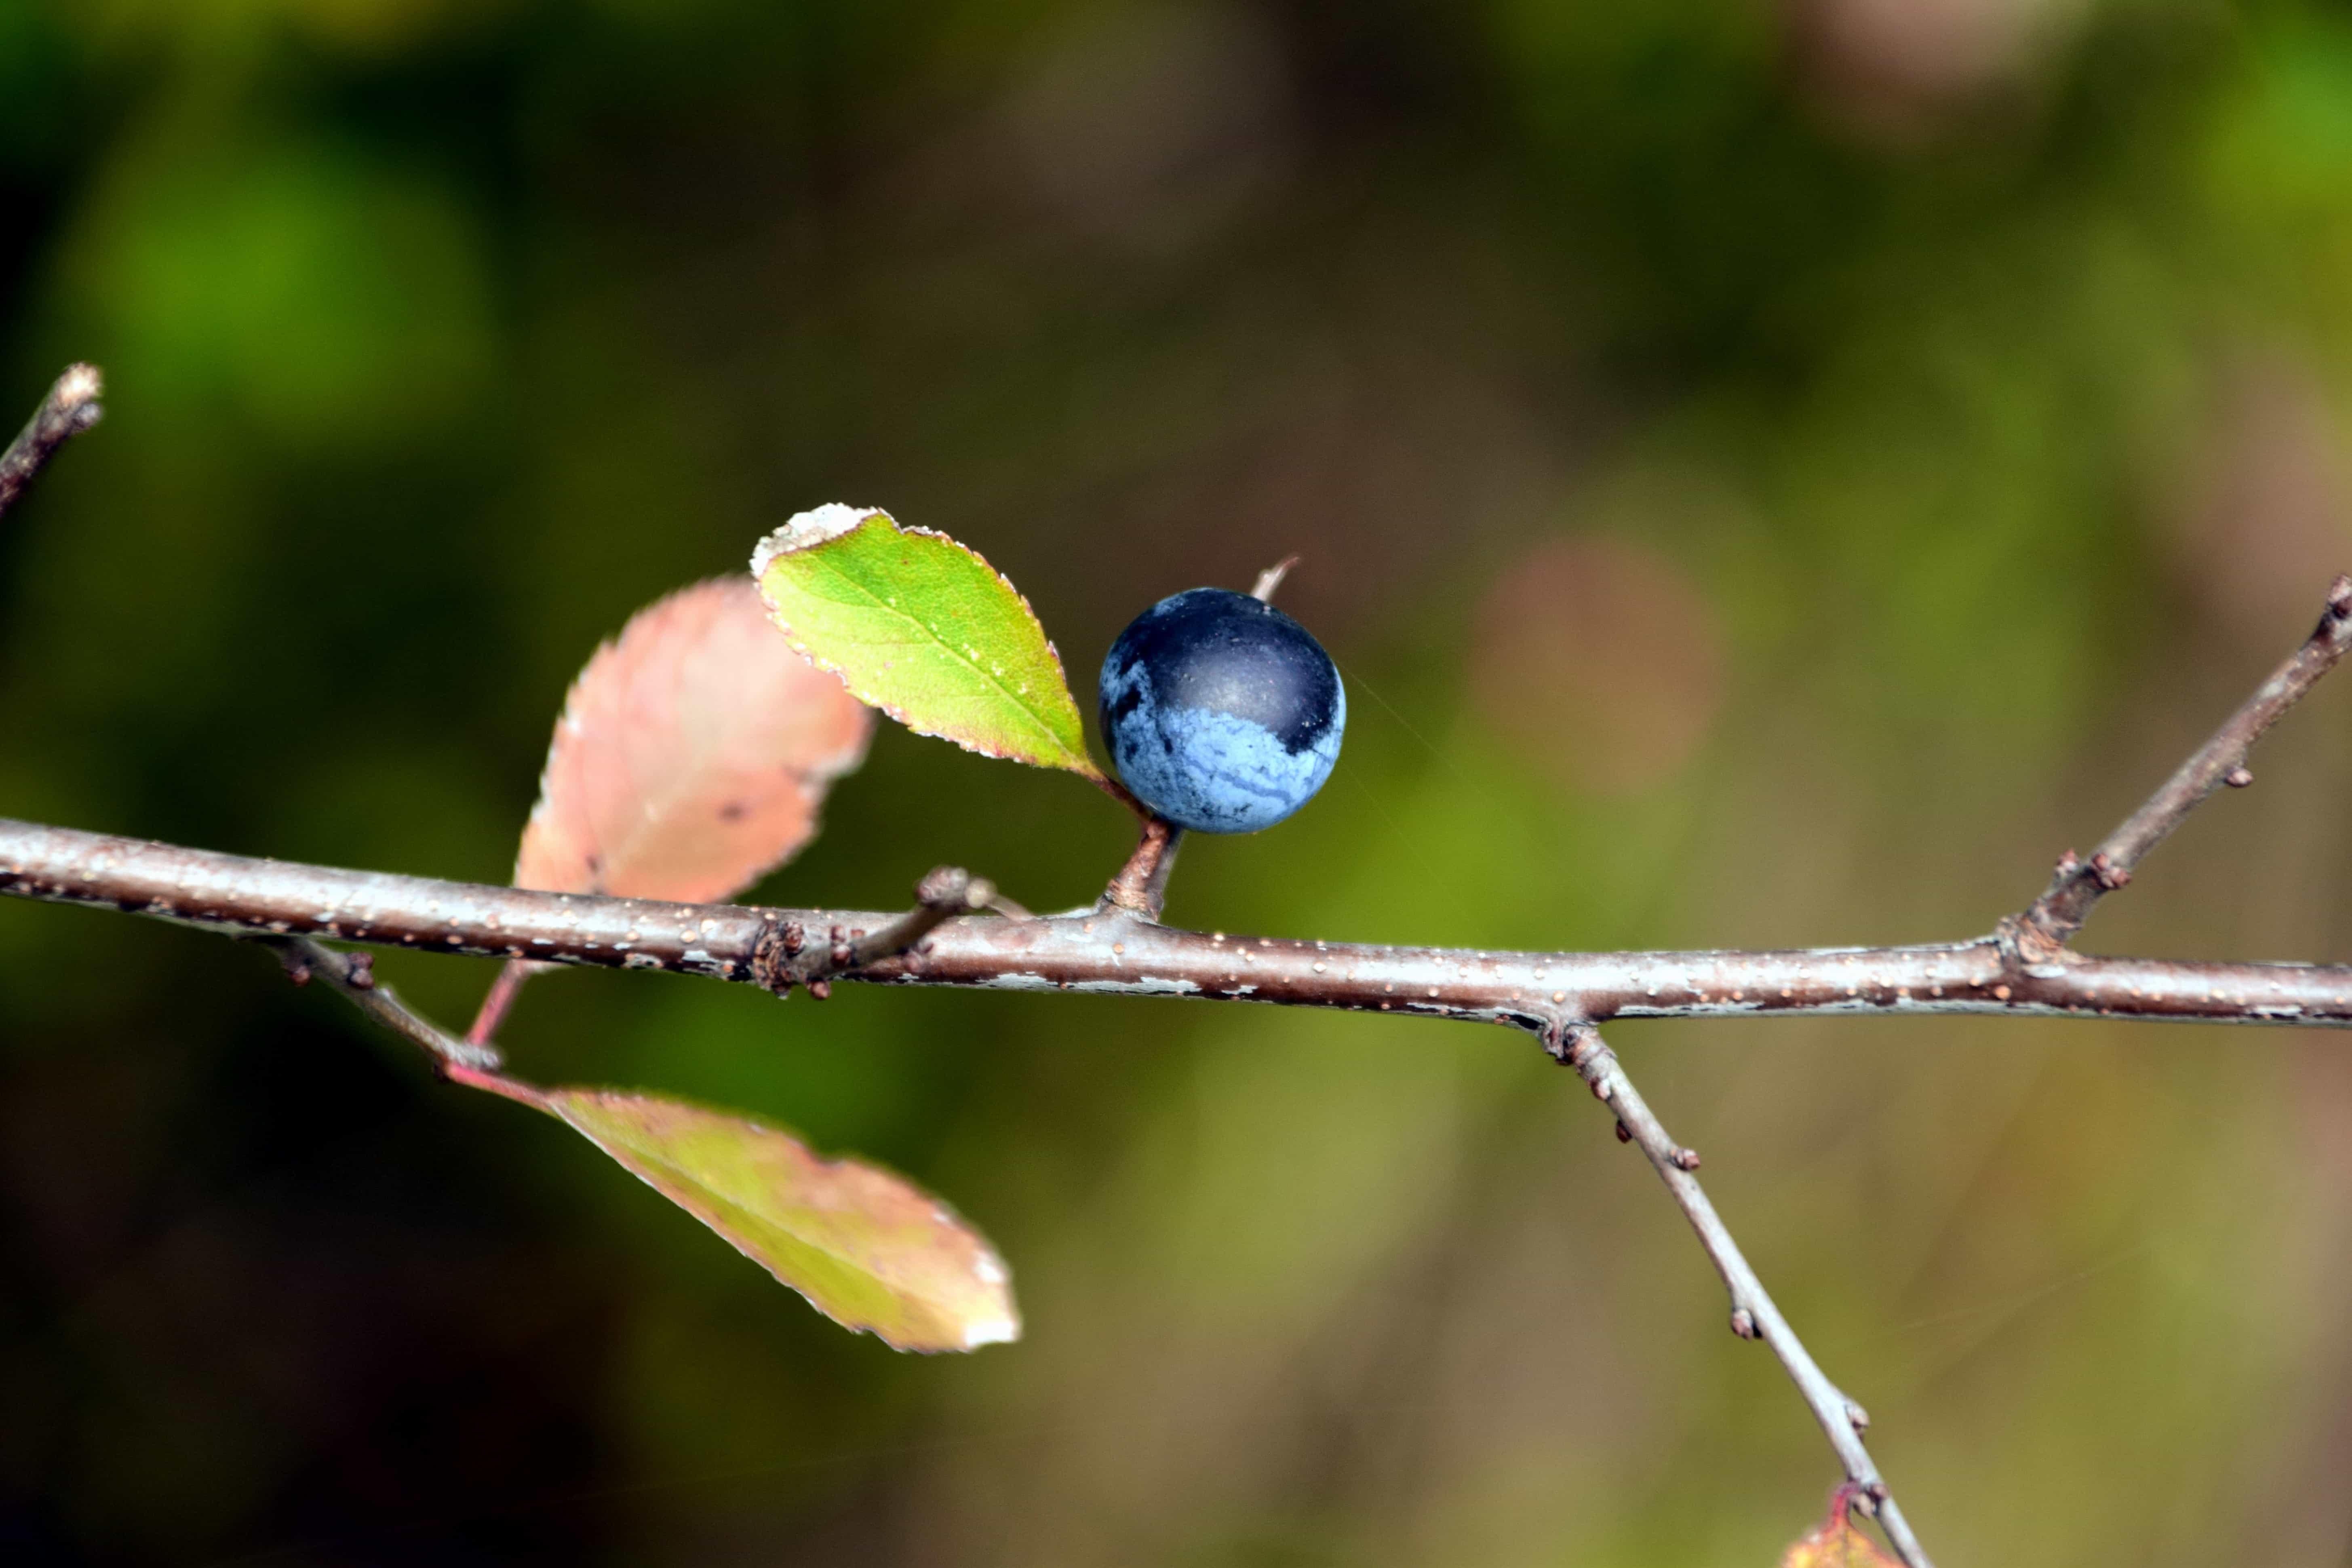 Free picture: leaf, blueberry, nature, berry, fruit, branch, outdoor ...